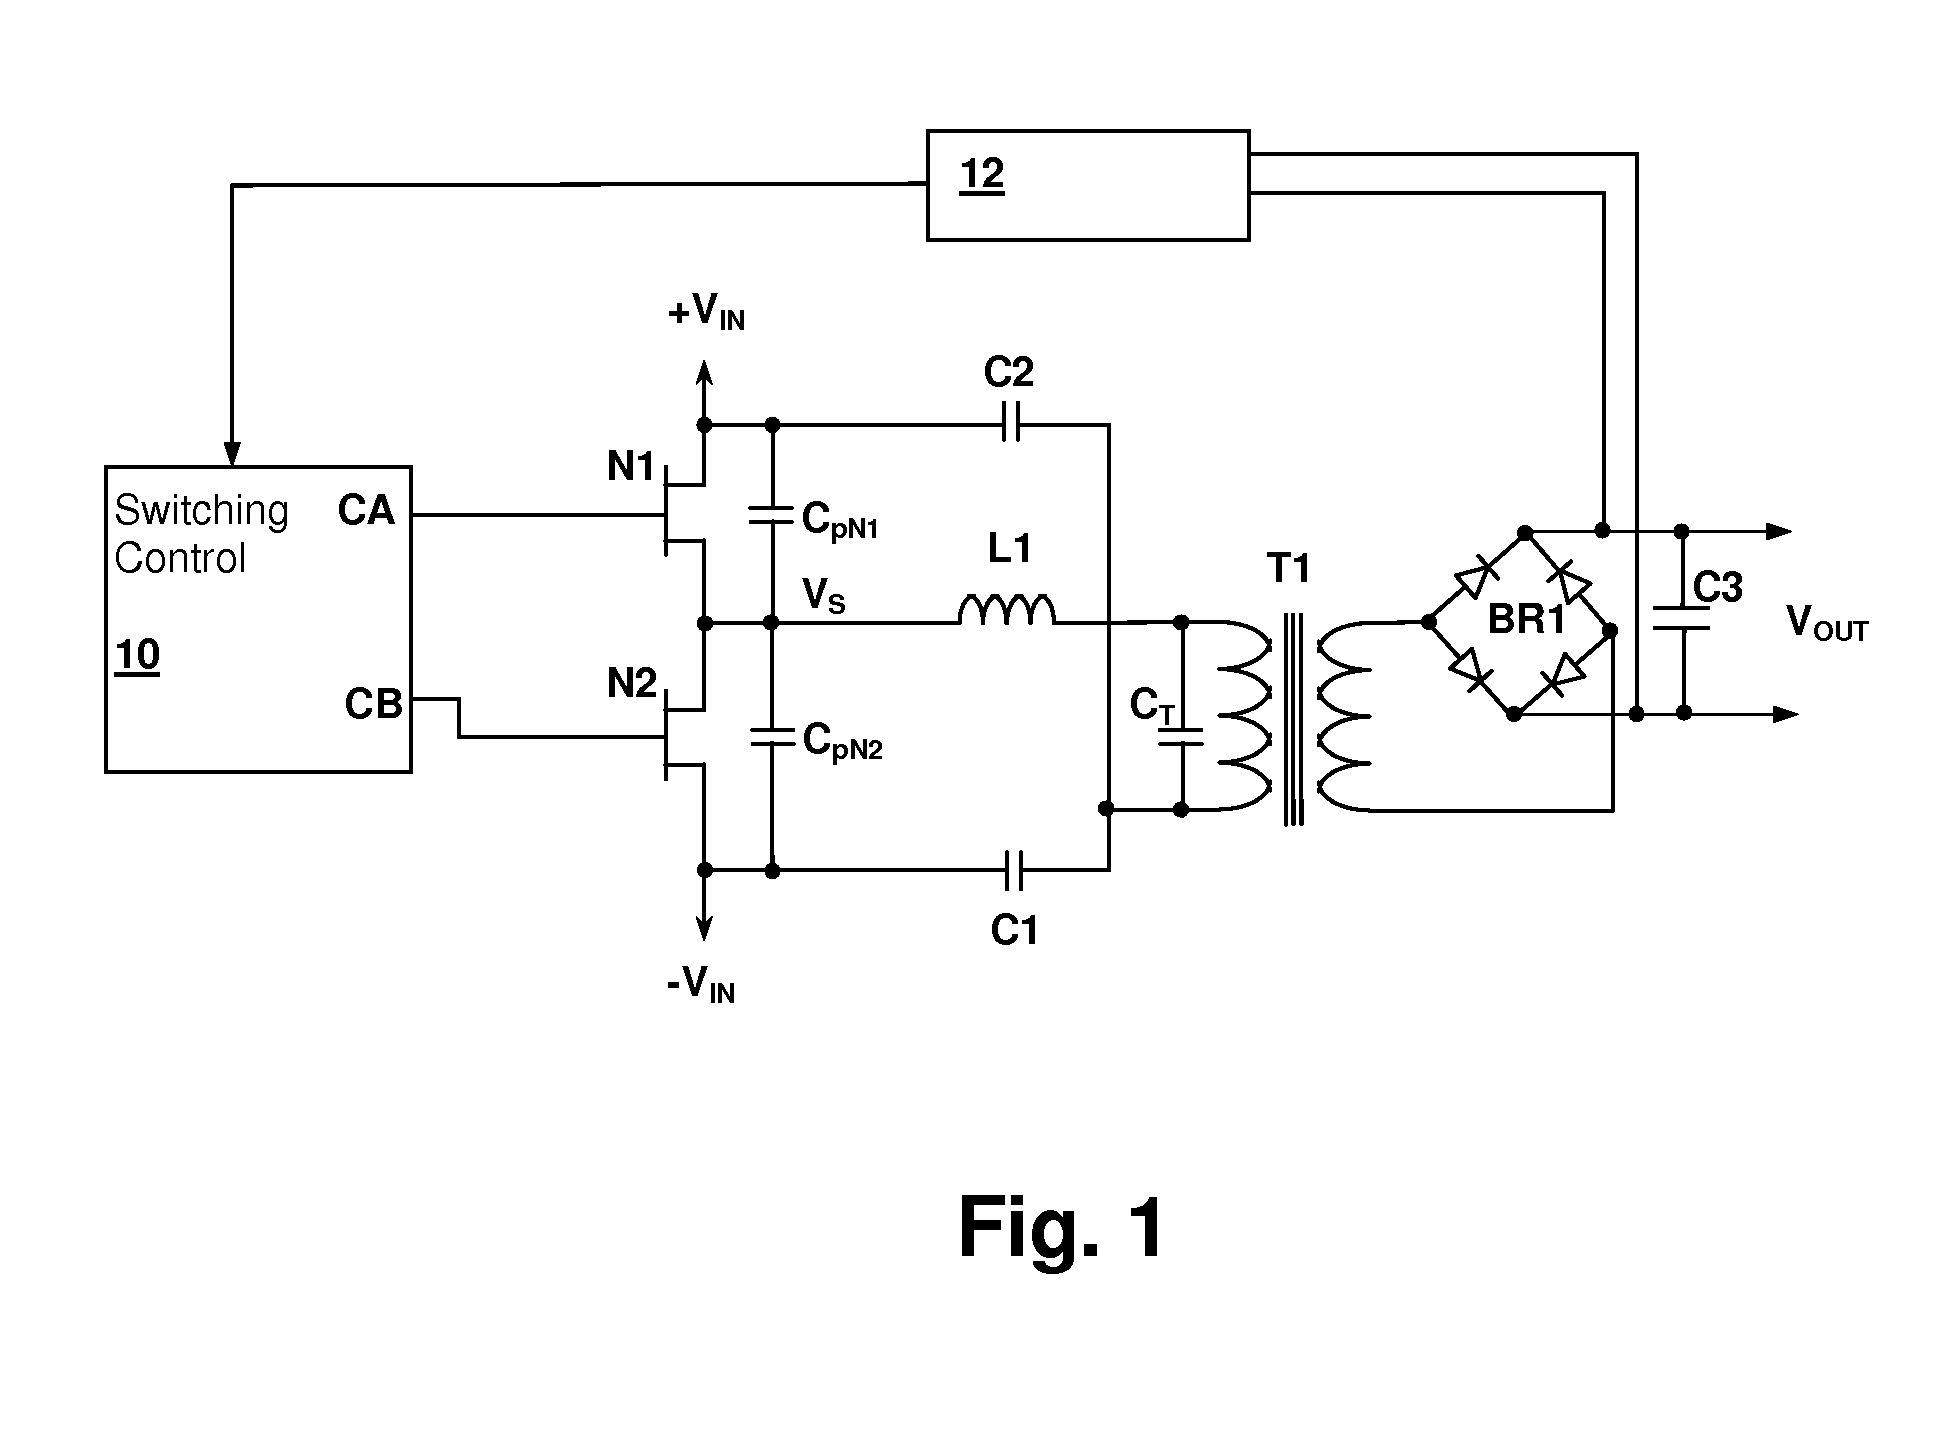 Audible noise suppression in a resonant switching power converter